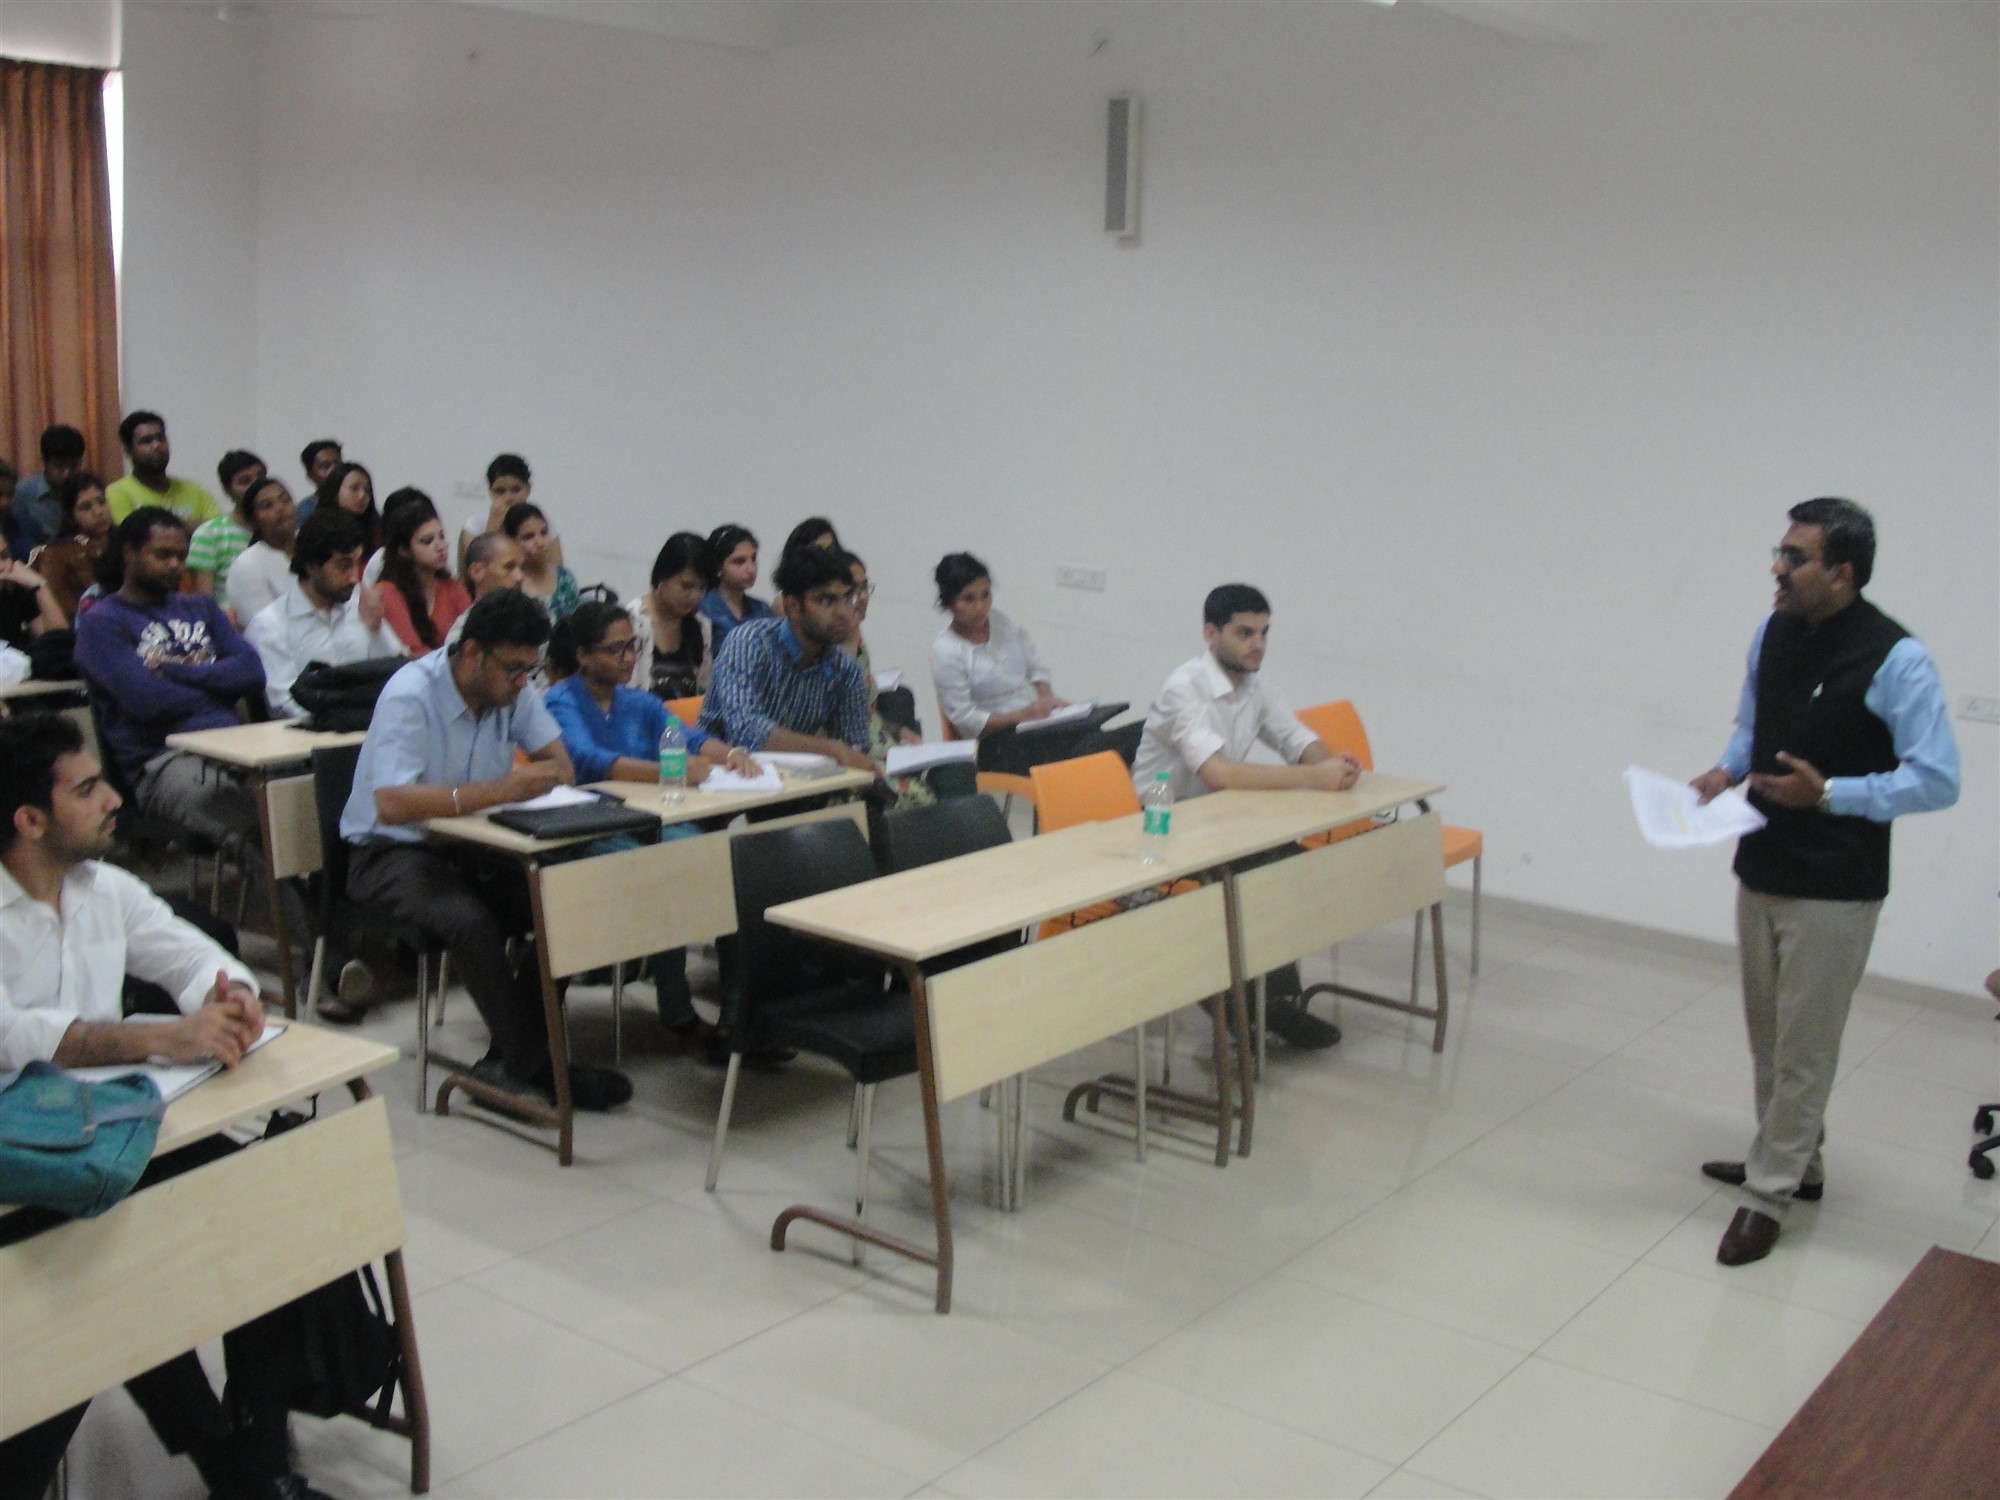 NATO Lectures at Pune Universities